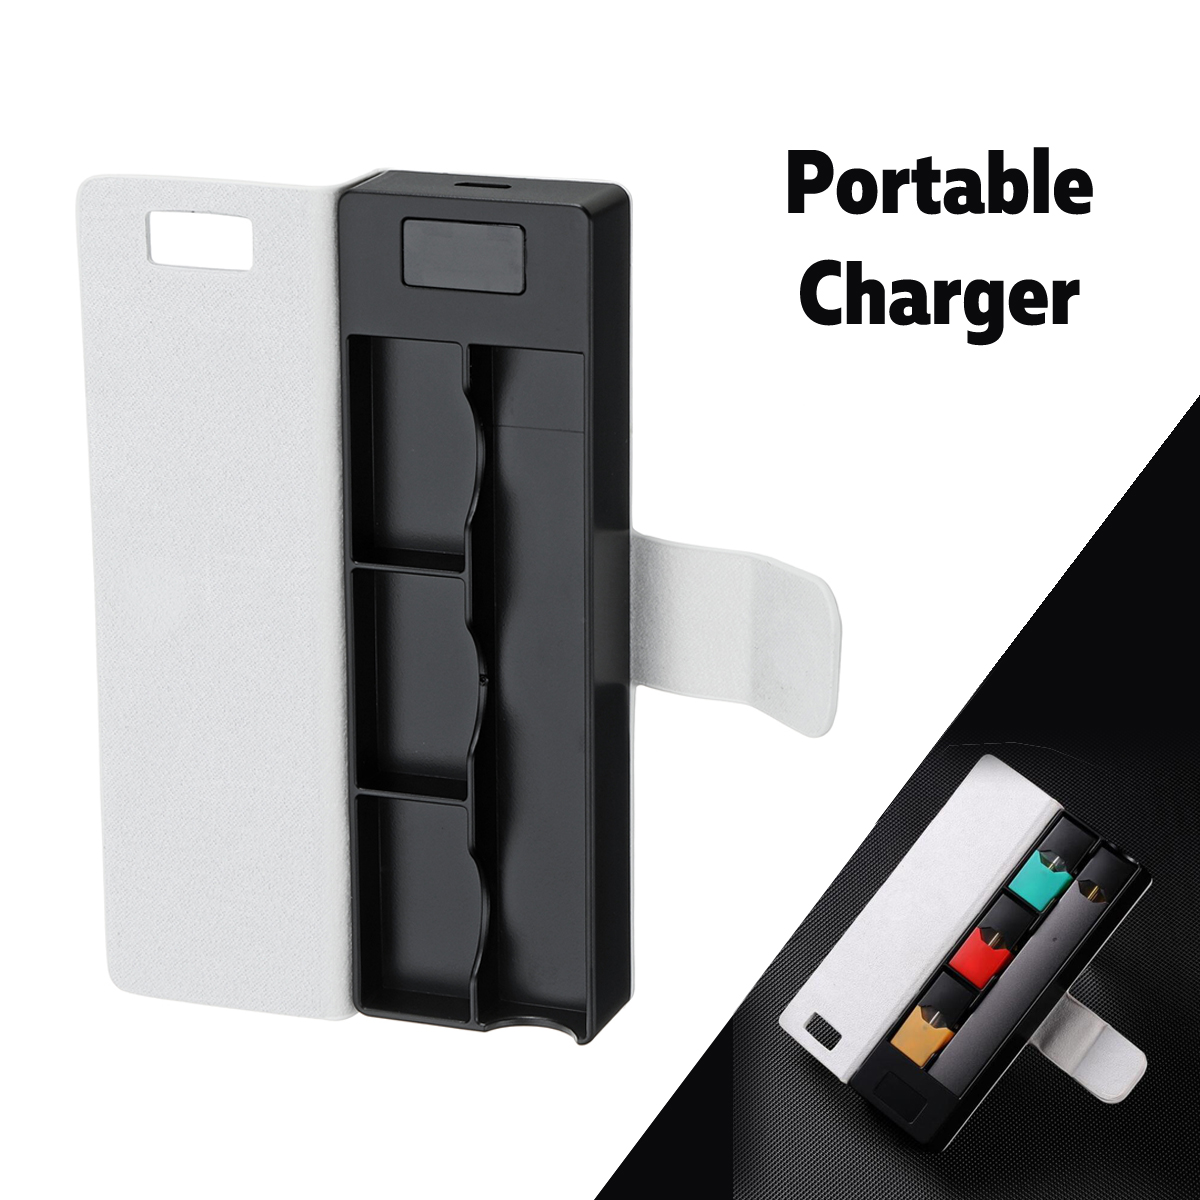 PU-Leather-Wired-Charger-Power-Bank-Charging-Battery-Case-Pods-Holder-with-USB-Cable-1361660-1